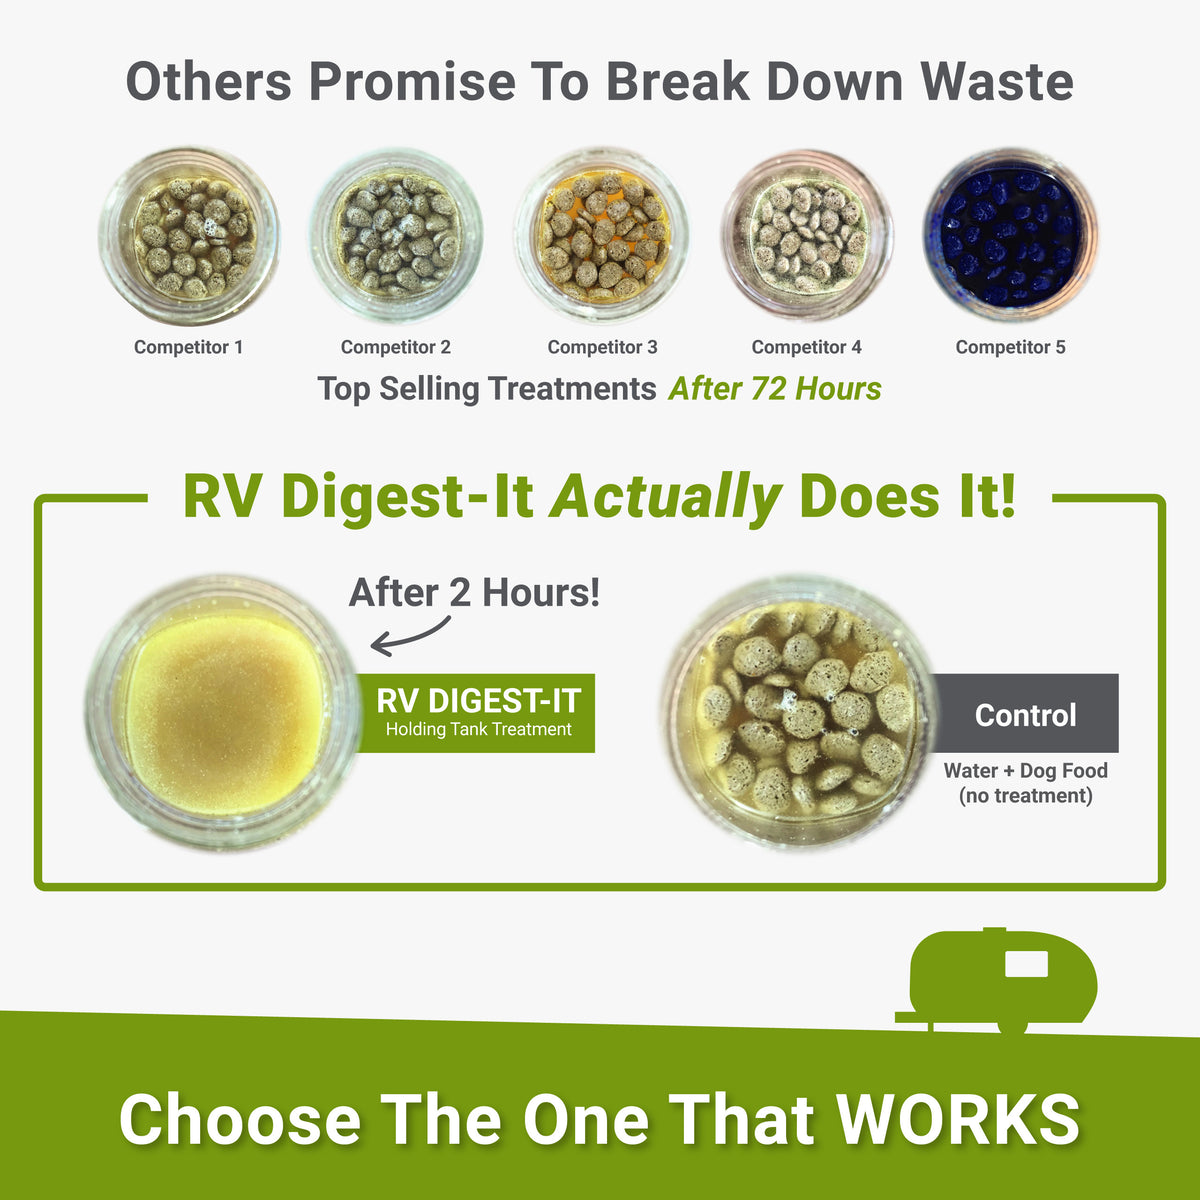 Choose an RV Holding Tank Treatment that works. RV Digest-It breaks down waste better than competitors.